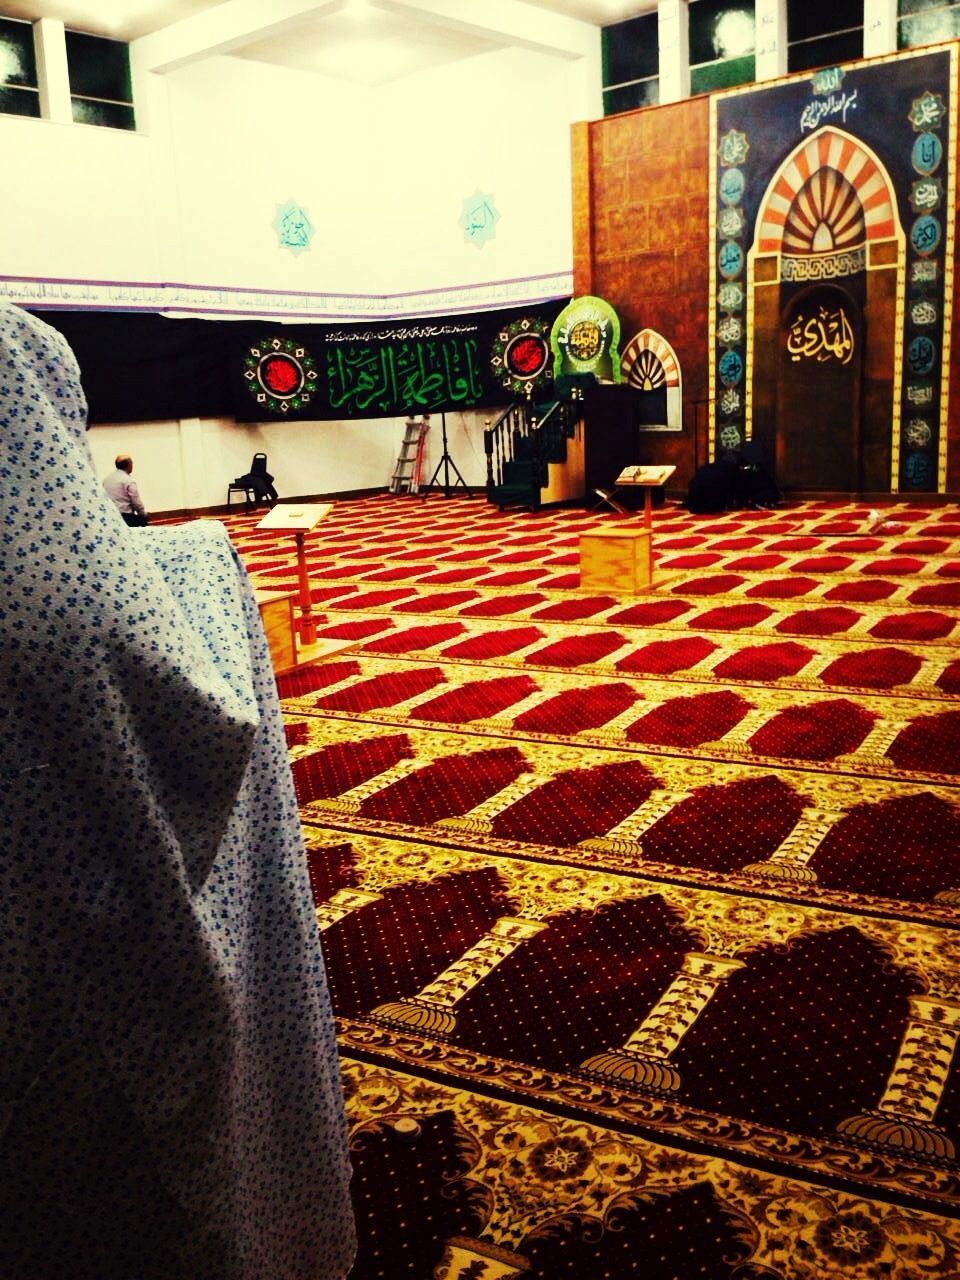 At the mosque